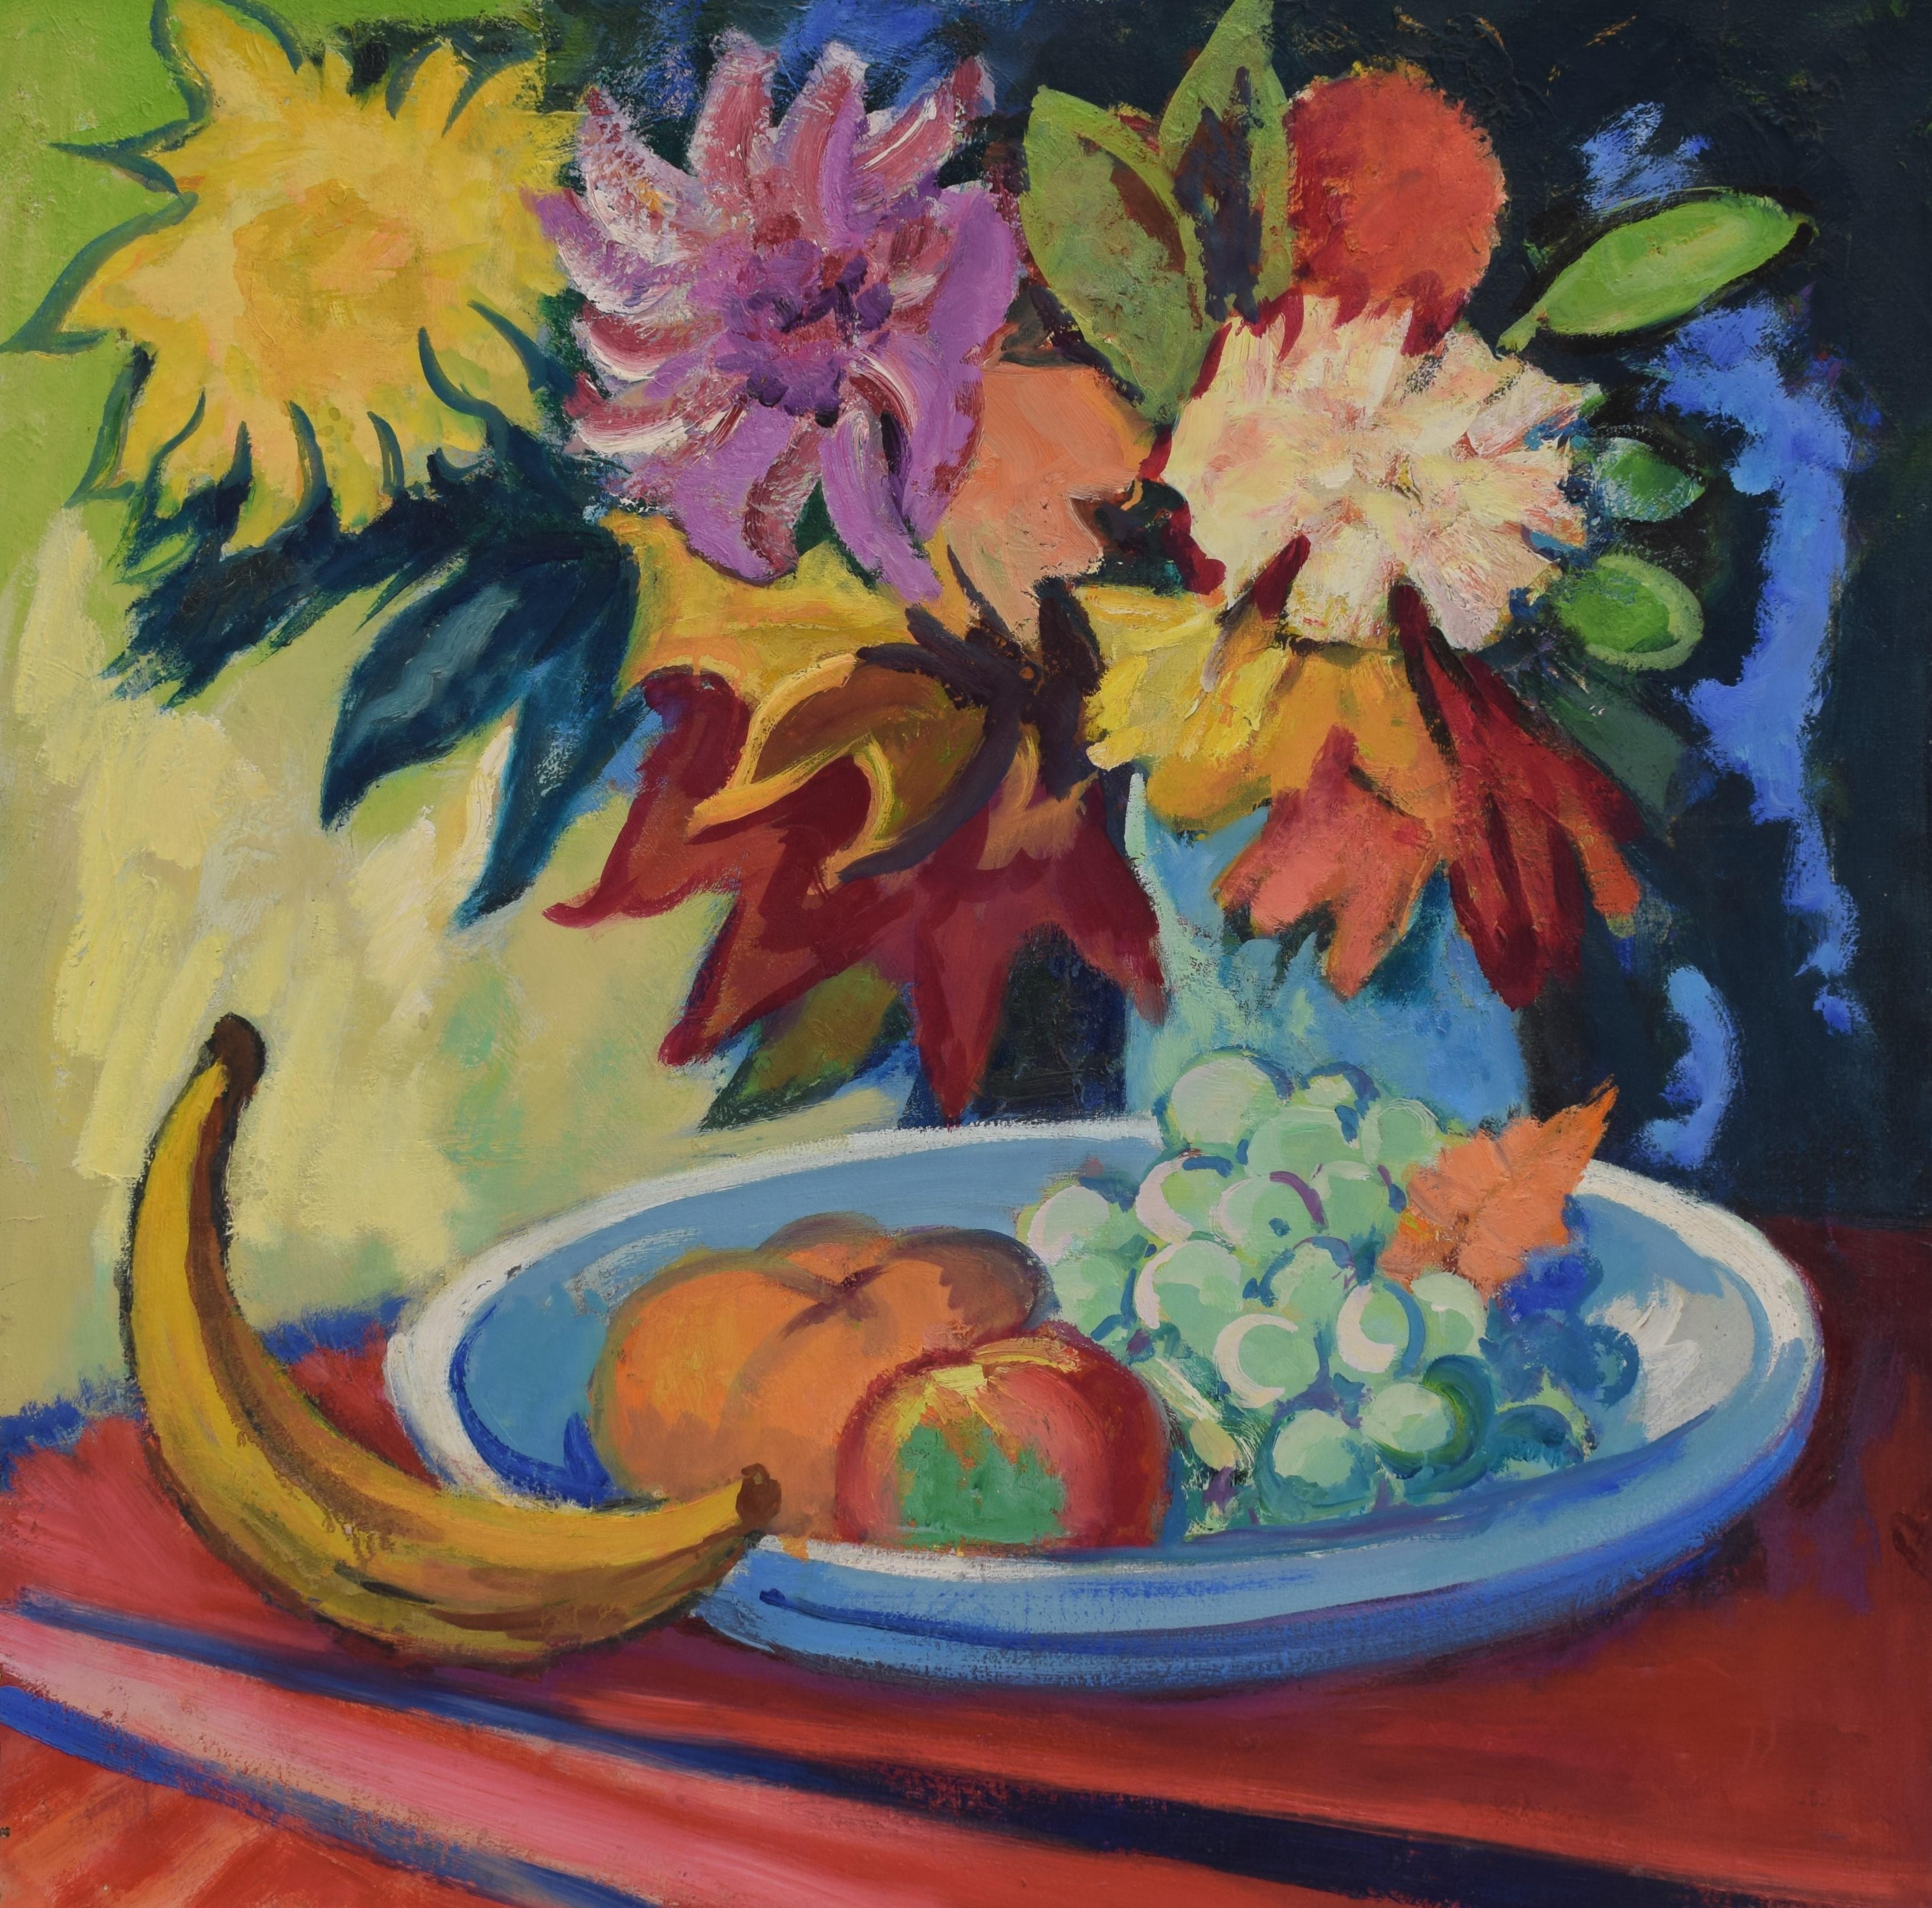  Still life with banana - Oil Paint on Canvas, Fauvist, Dutch Artist, Colorful - Painting by Freek van den Berg